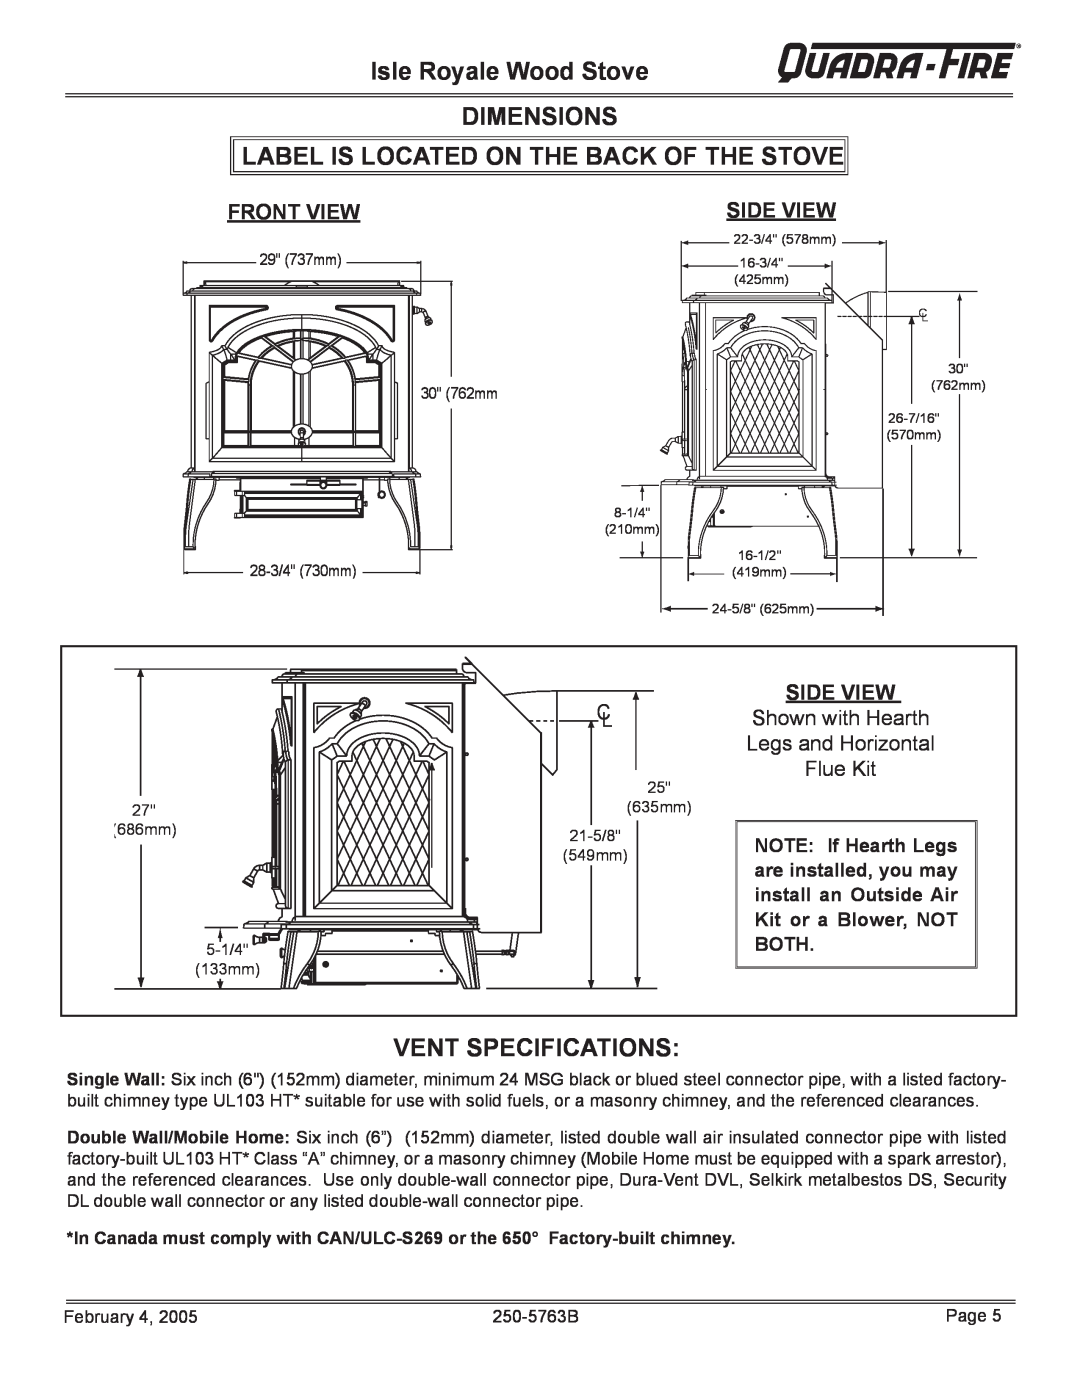 Quadra-Fire Isle Royale Wood Stove DIMENSIONS, Label Is Located On The Back Of The Stove, Vent Specifications 